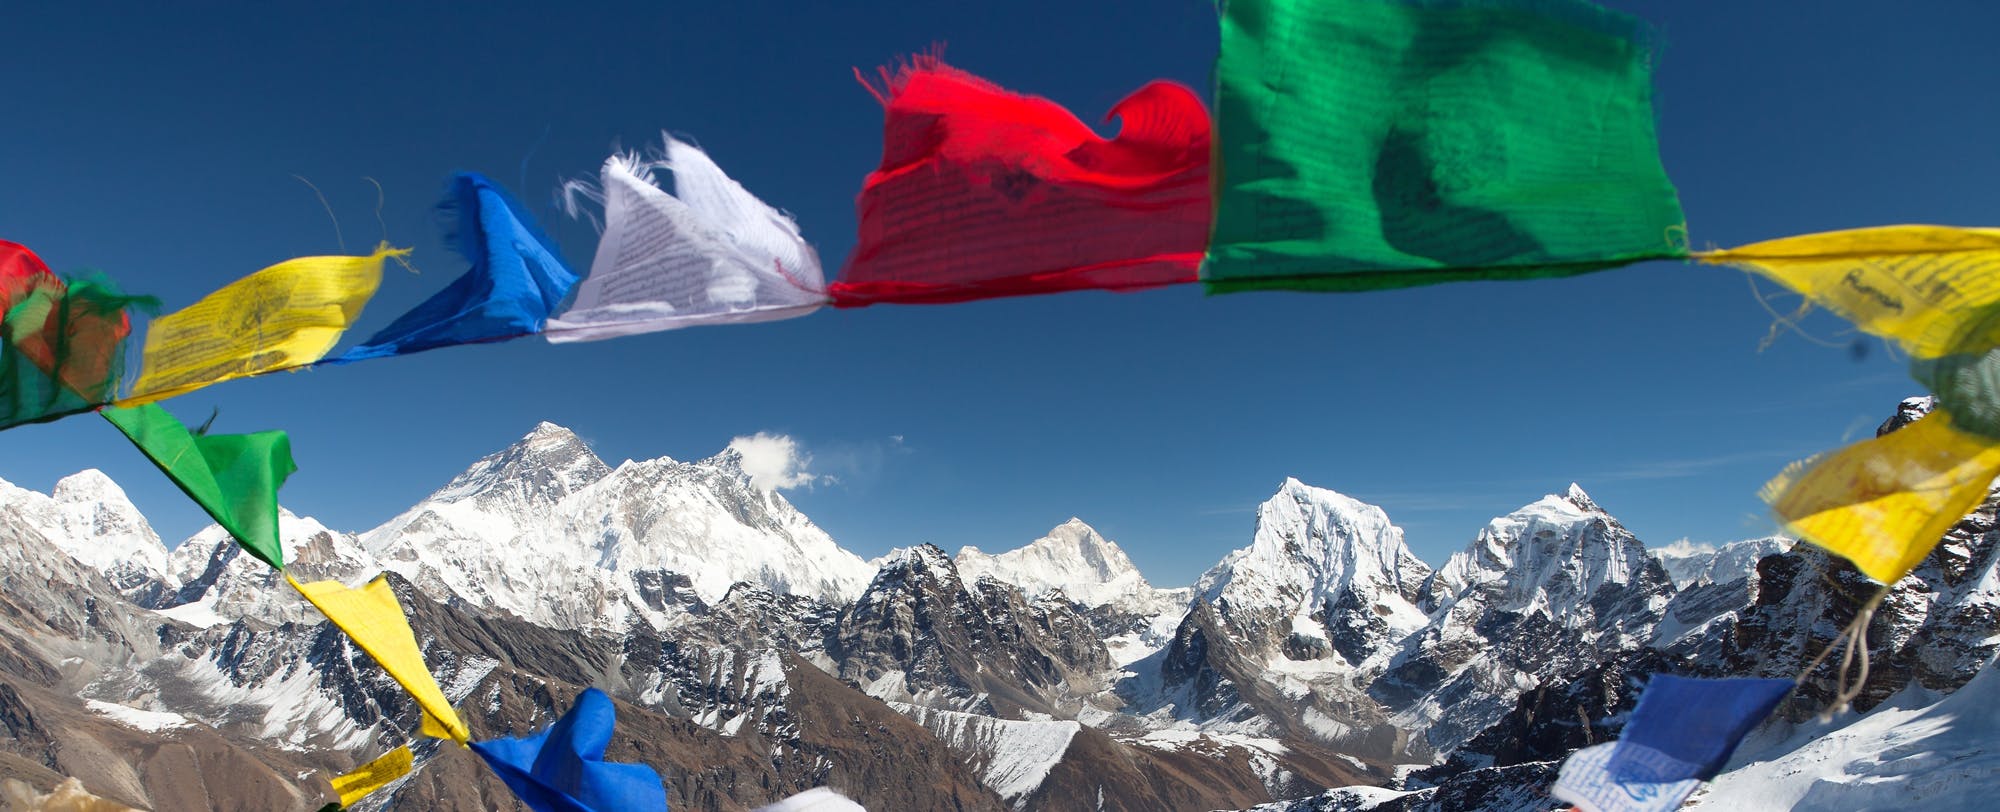 Everest Avalanche: Connections And Reflections